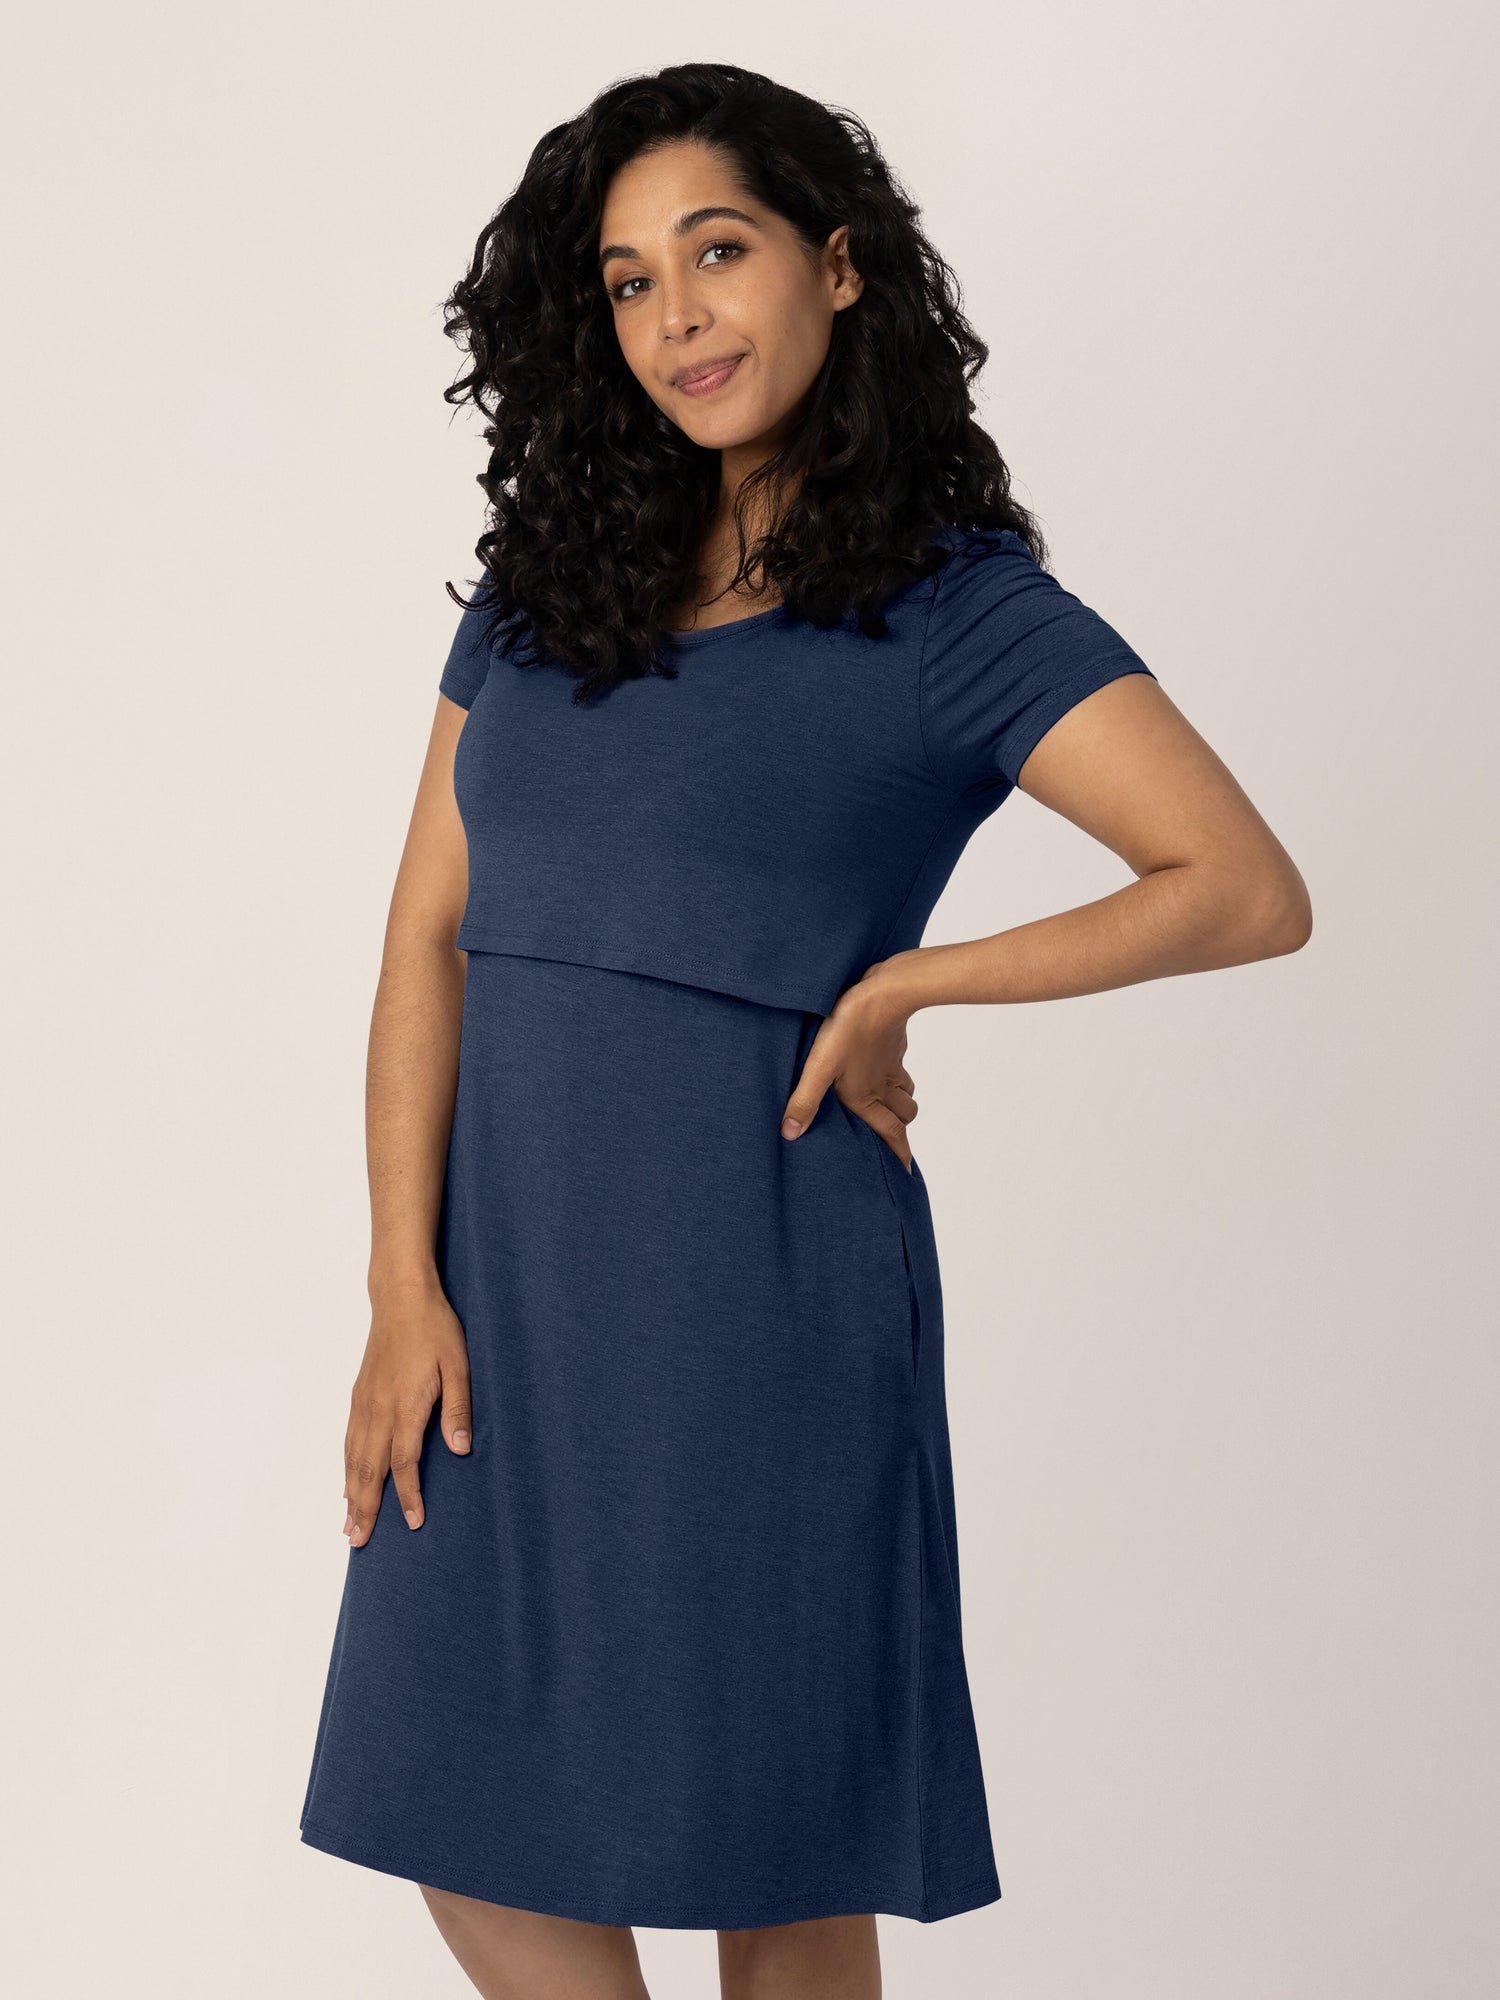 Model with her hand on her hip wearing the  Eleanora Bamboo Maternity & Nursing Dress in Navy Heather. 